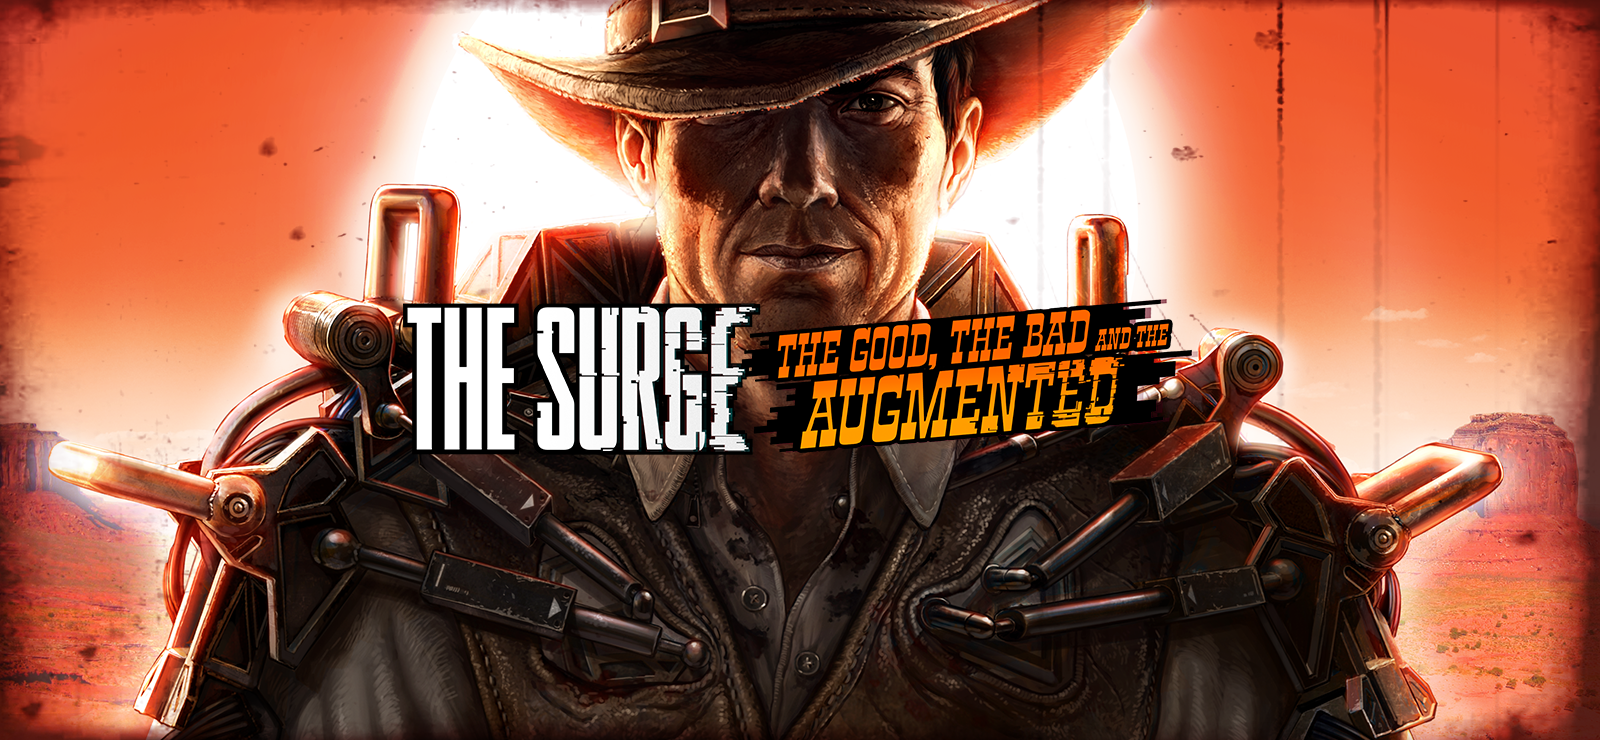 The Surge - The Good, The Bad And The Augmented Expansion